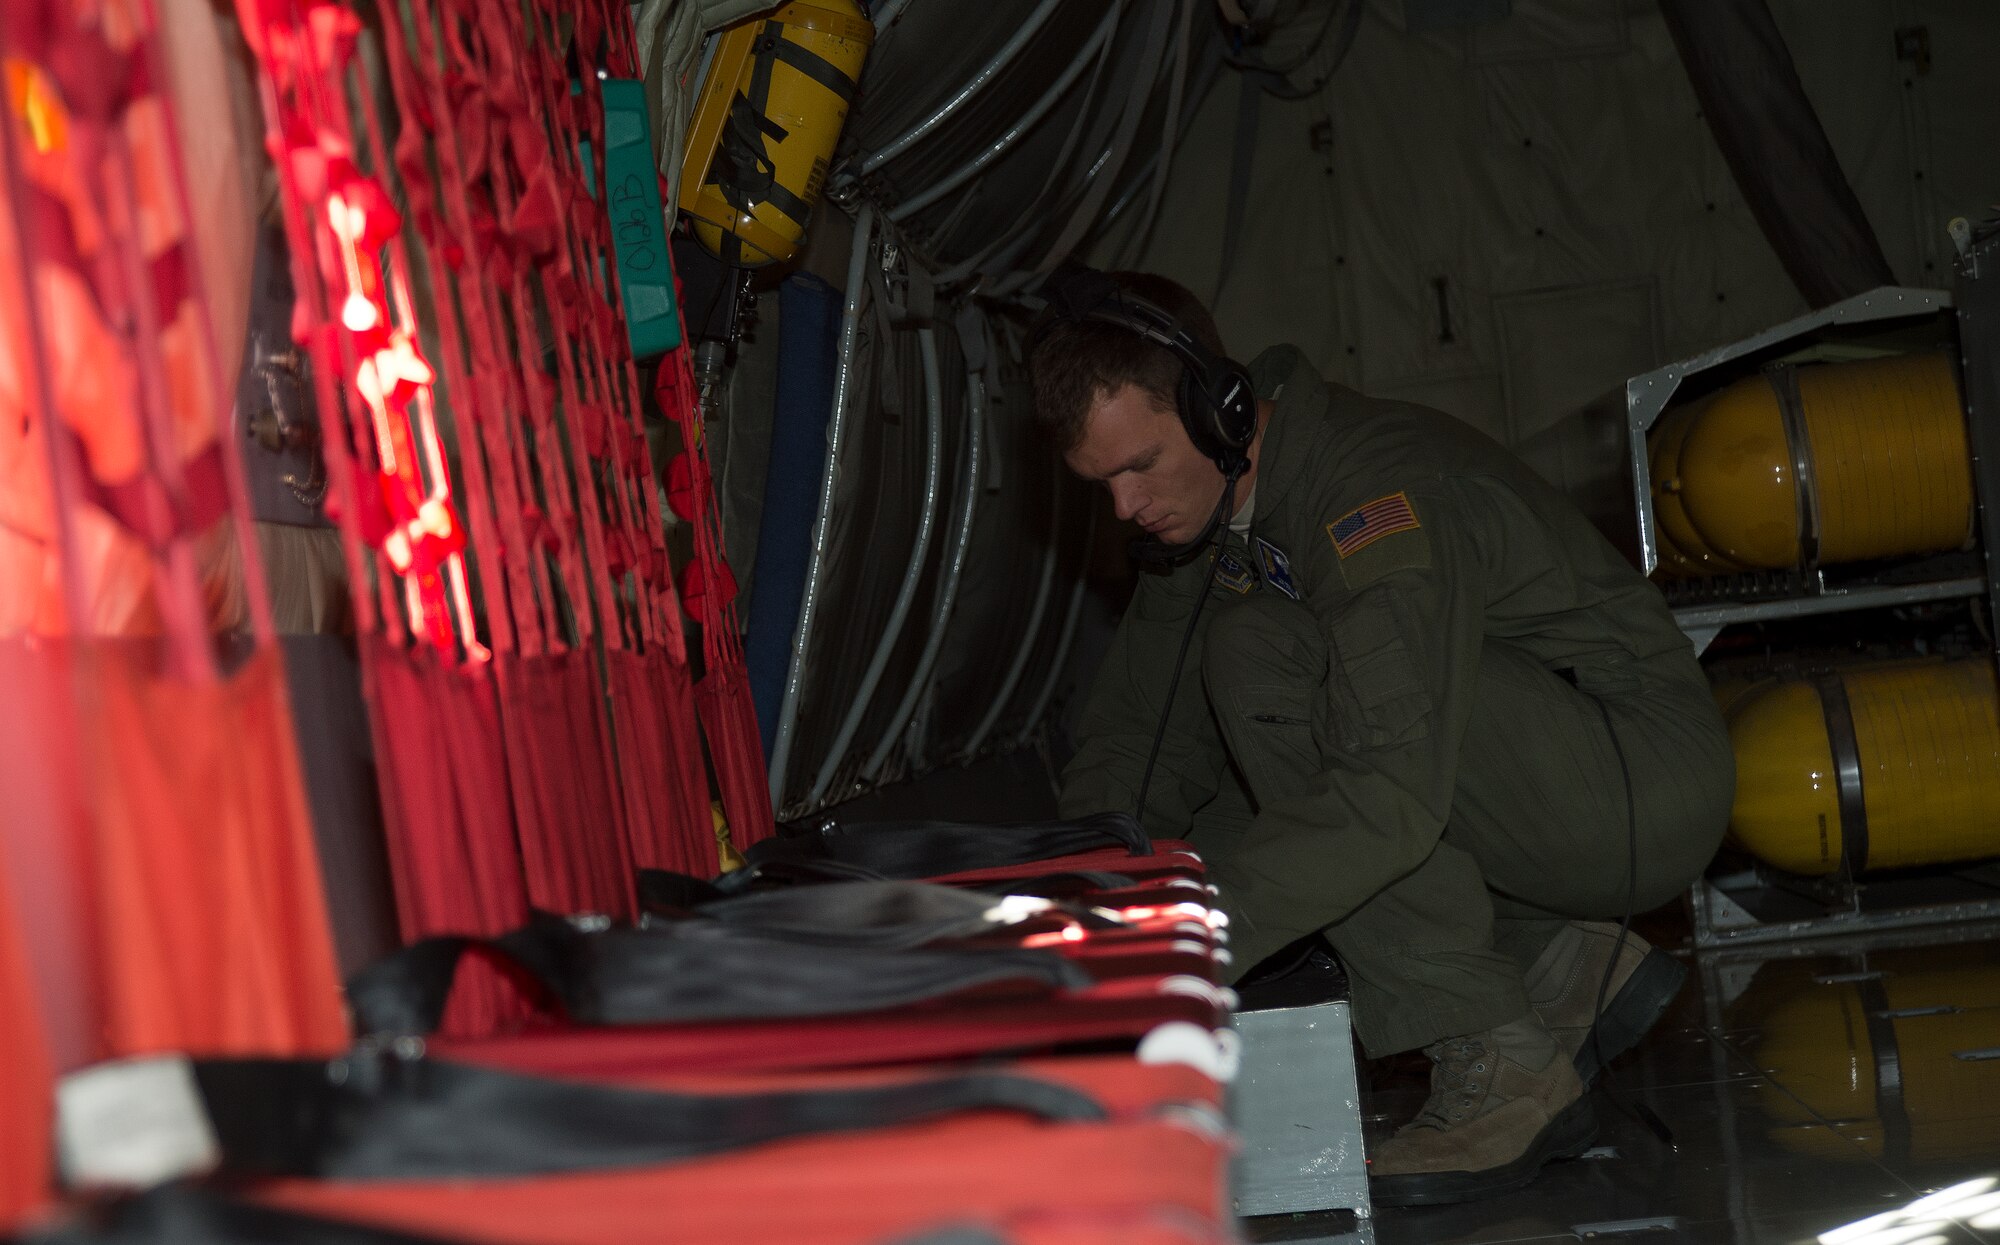 Staff Sgt. Derek Lyles, 349th Air Refueling Squadron boom operator, performs a preflight inspection inside a KC-135 Stratotanker November 8, 2013, at McConnell Air Force Base, Kan. The inspection was part of Lyles check ride, a flight where he is evaluated for his upgrade training. (U.S. Air Force photo/Airman 1st Class Colby L. Hardin)